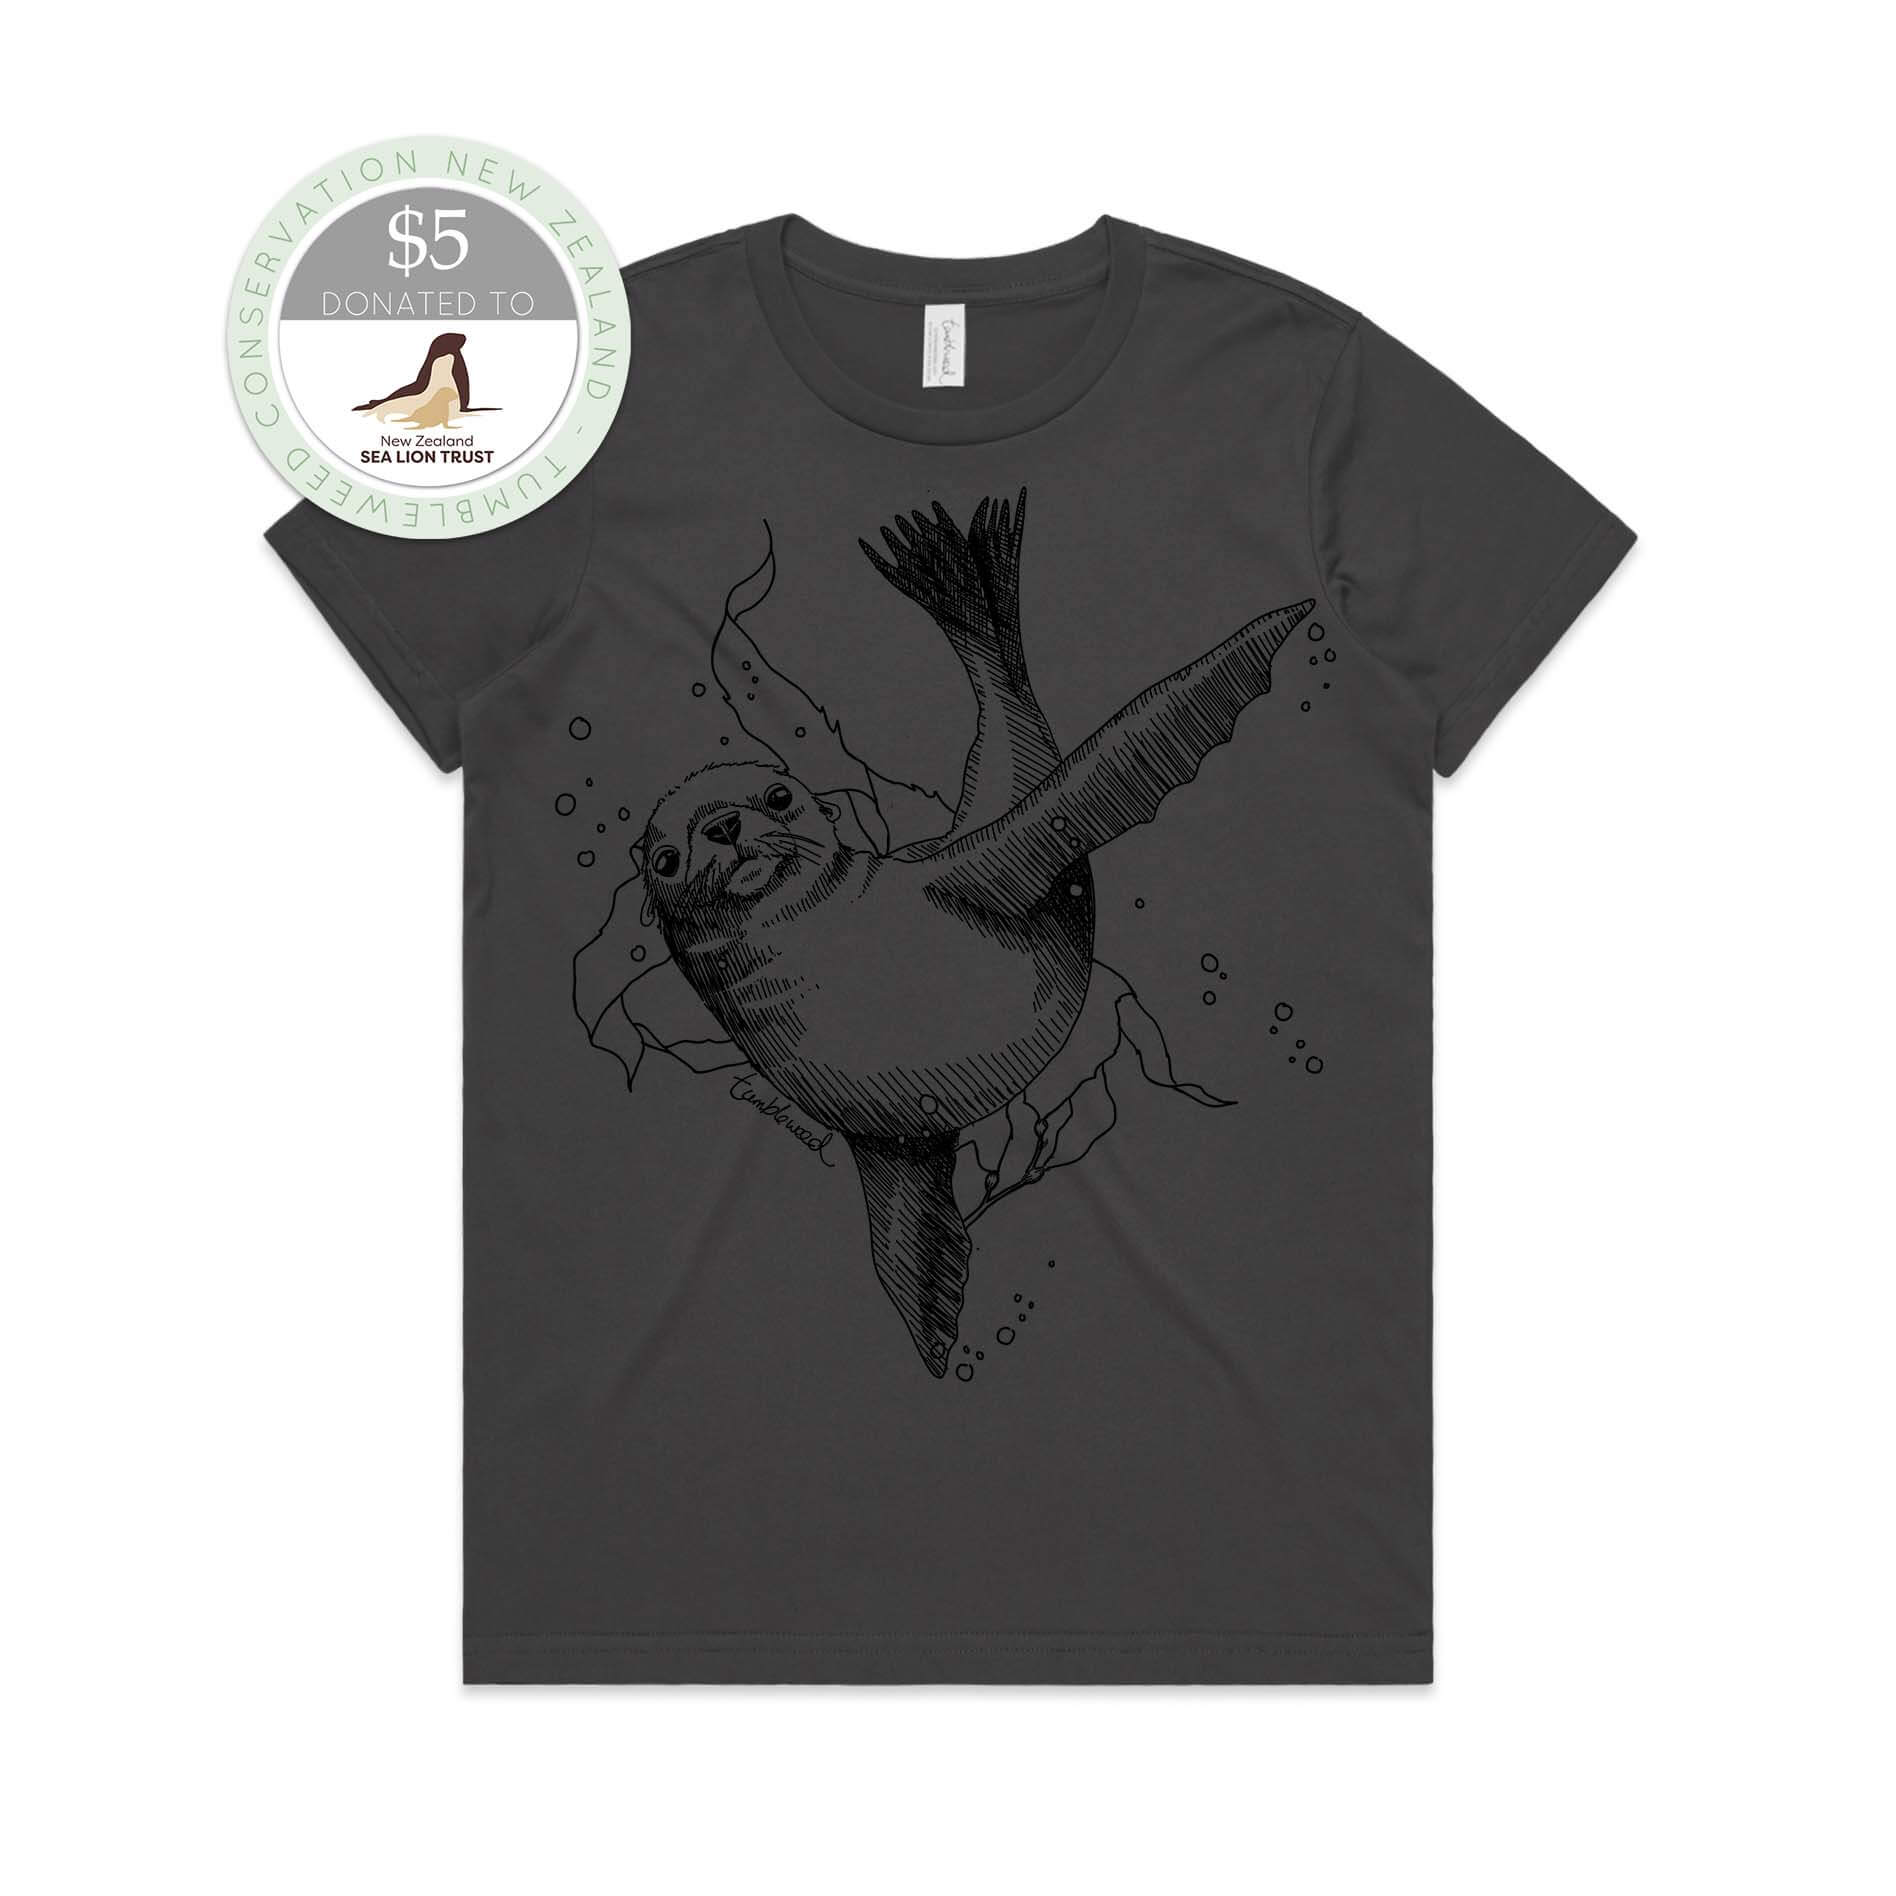 Sage, female t-shirt featuring a screen printed New Zealand sea lion design.